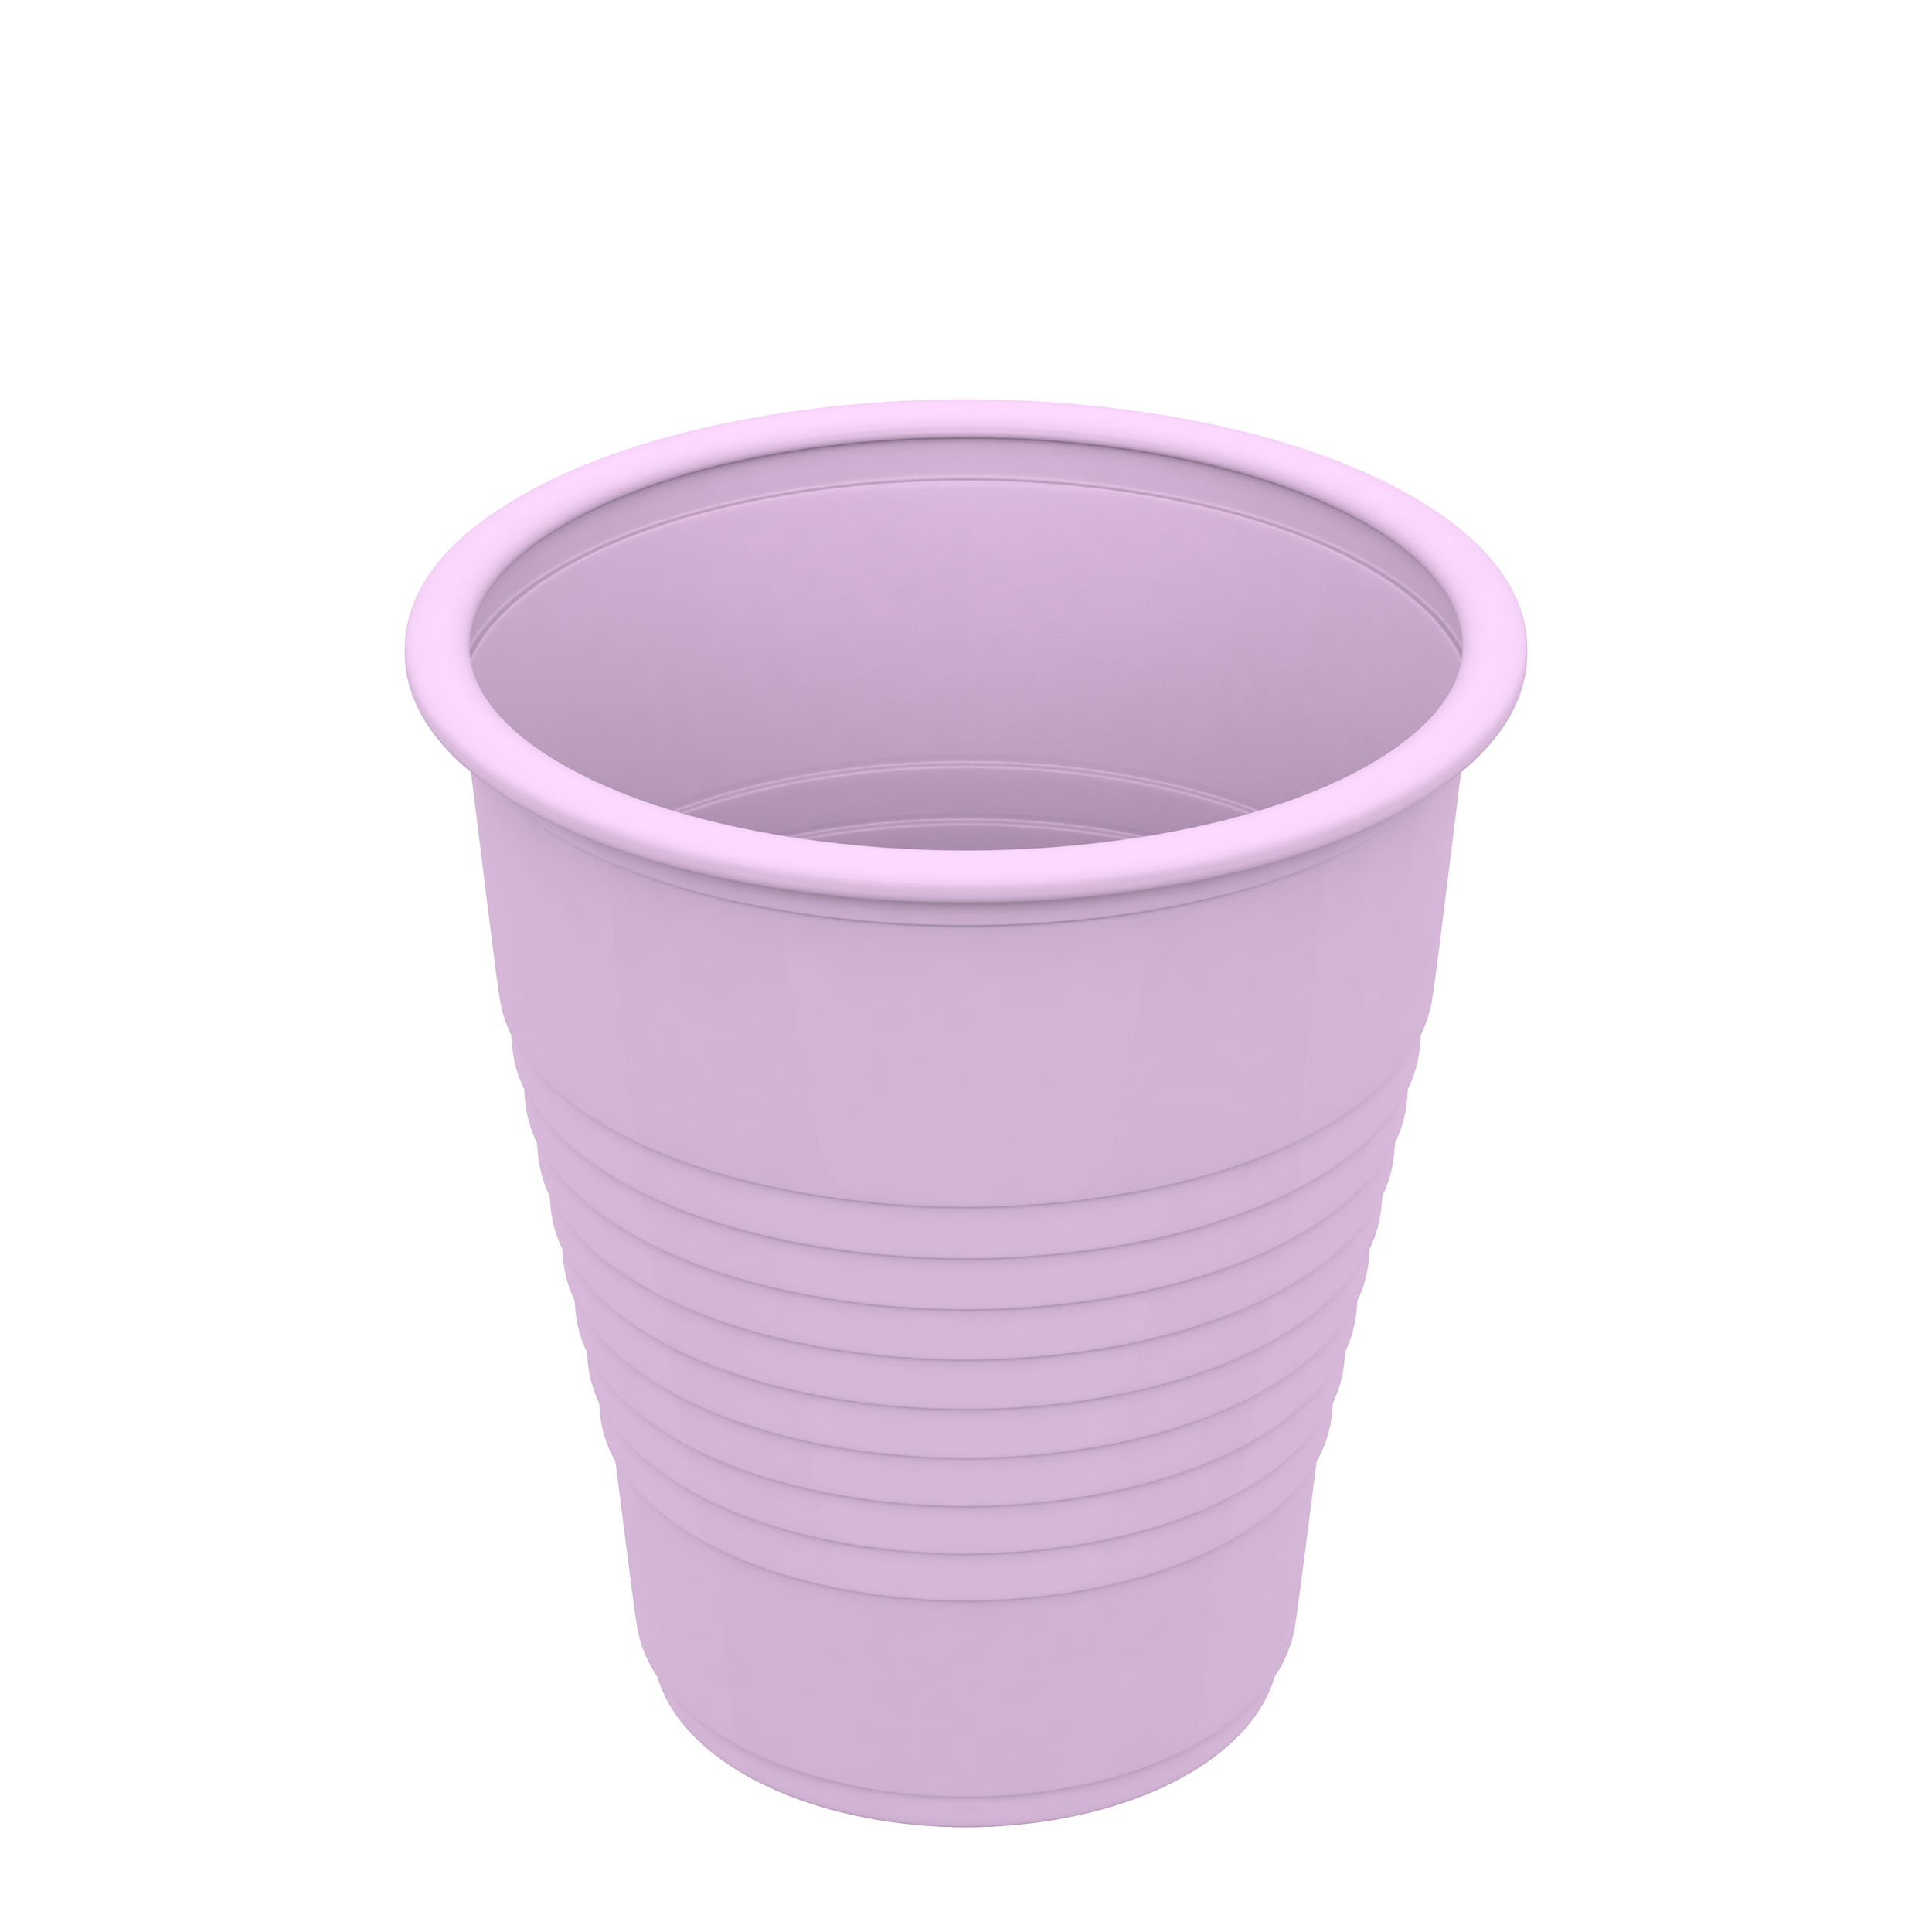 Drinking Cups - 5 oz. Lavender